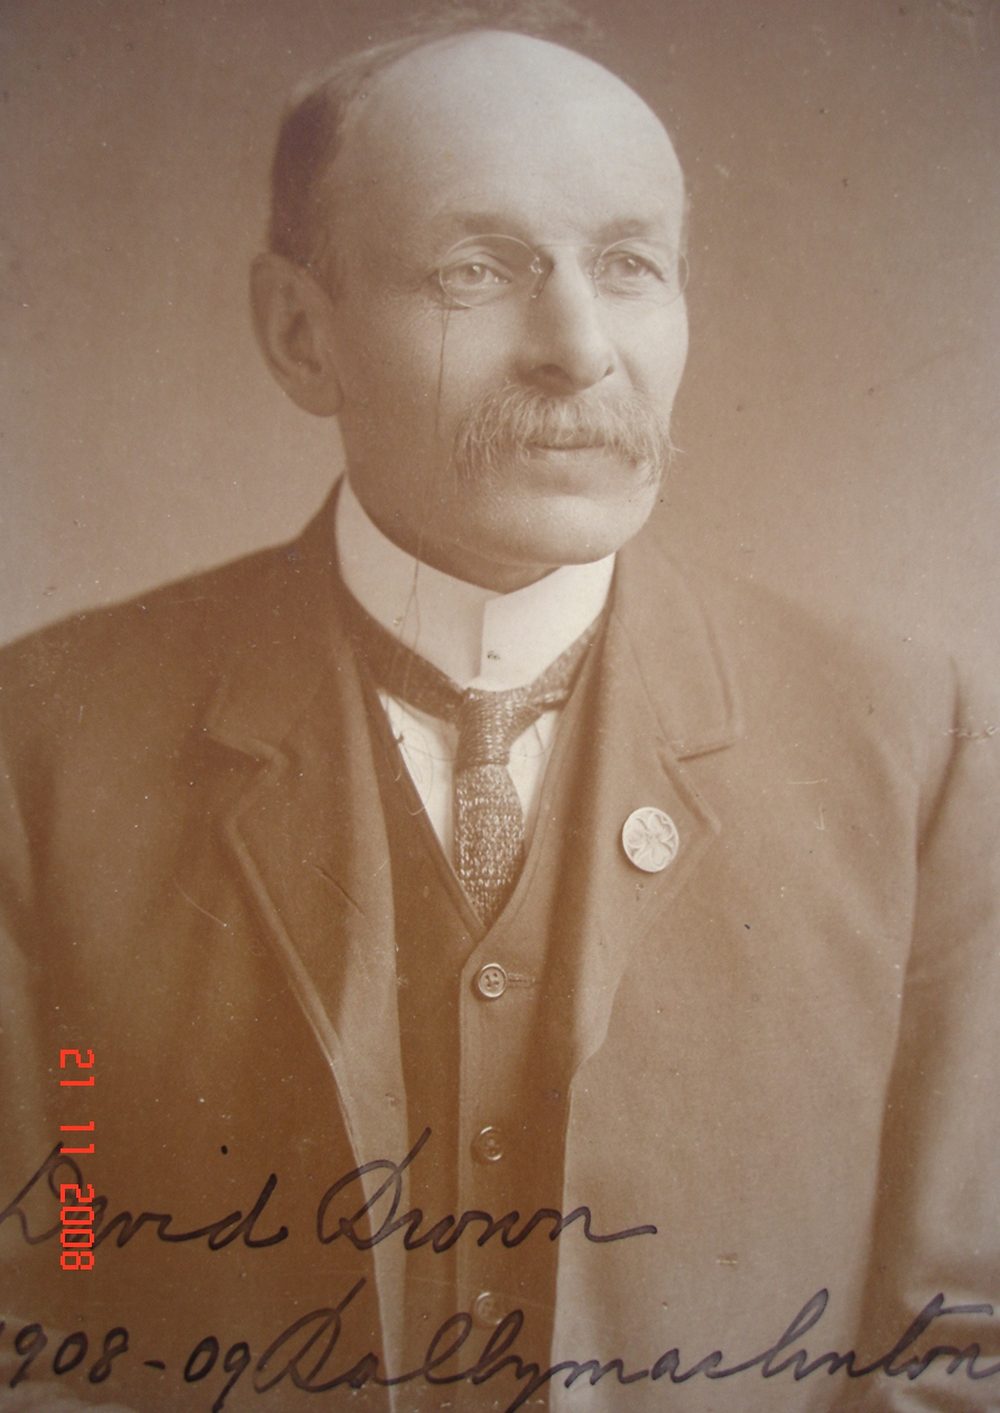 David Brown, co-director of the Donaghmore Soap Works, county Tyrone, c. 1908-09. The caption refers to ‘Ballymaclinton' – the name of village display at the International exhibitions. He was aged 49 in this picture, and if he is the photographer of our Palestine collection, made that journey a decade earlier in his late thirties. Picture courtesy of Donaghmore Historical Society.